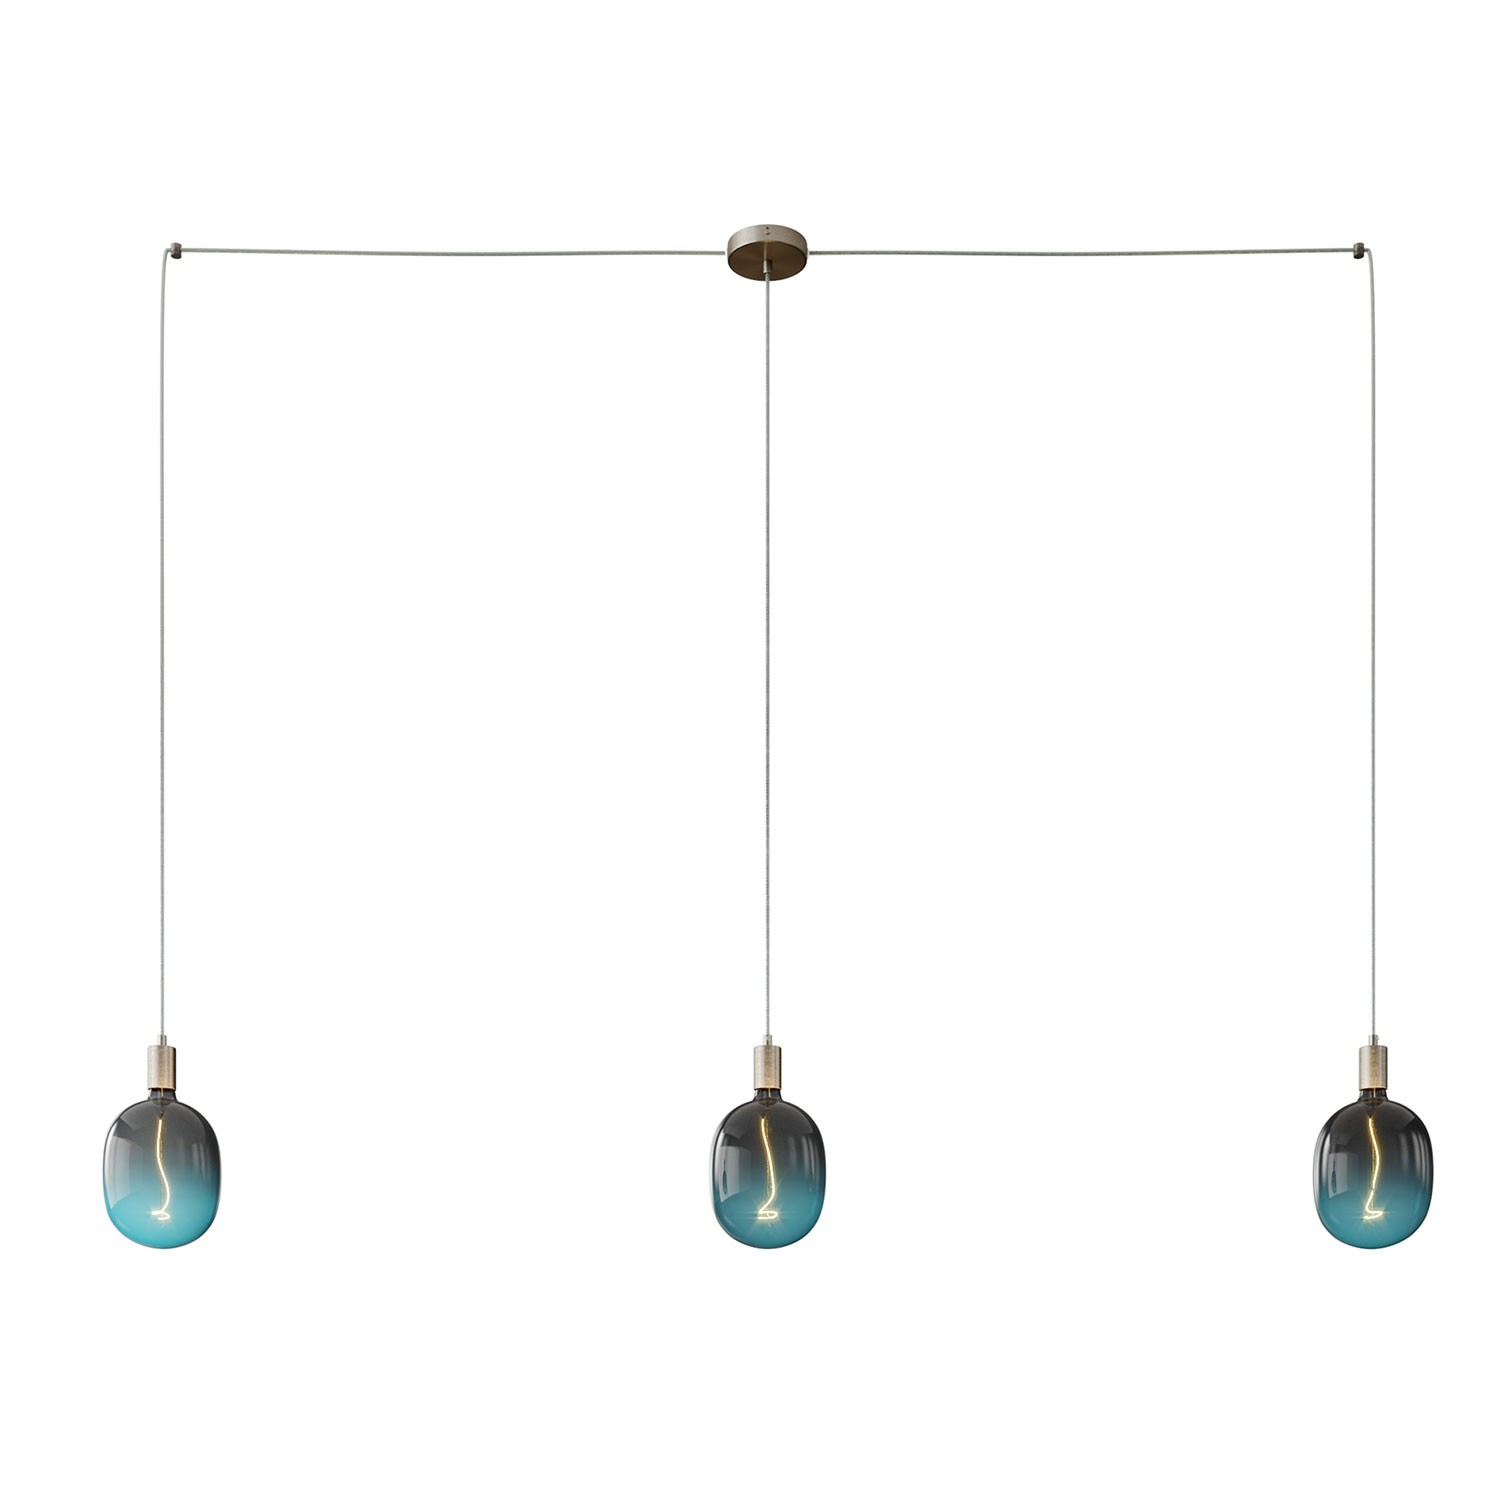 Spider - 3-light multi-pendant Made in Italy lamp featuring fabric cable and metal finishes